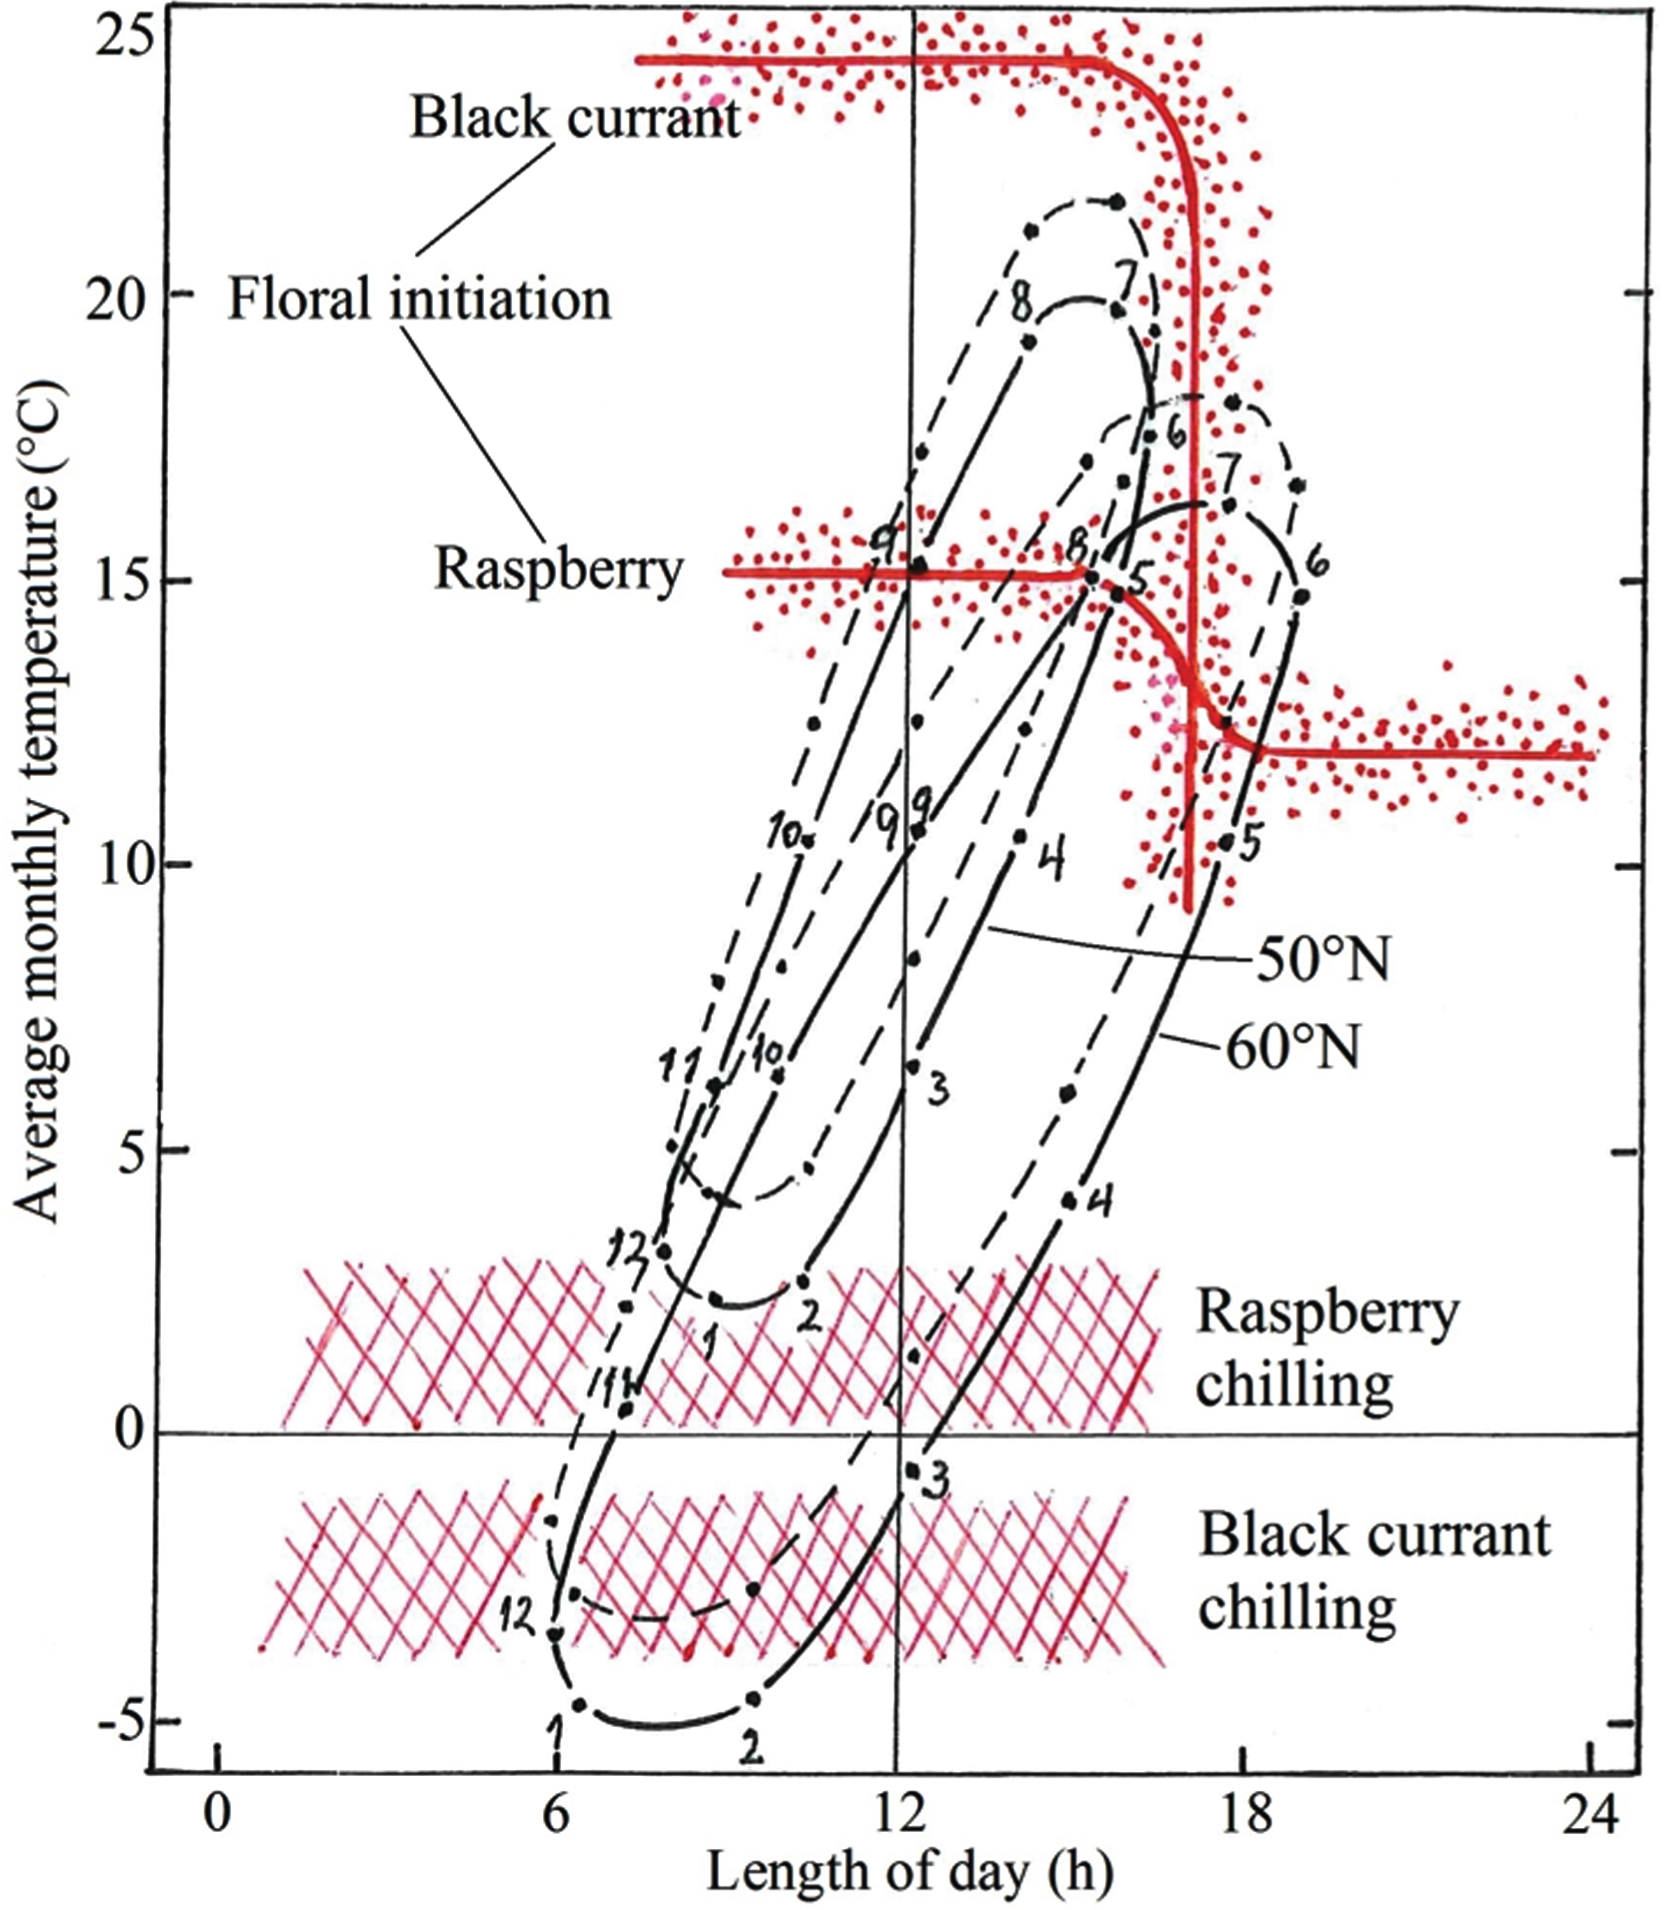 Climate-photothermographs for Ås, Norway (60°N) and Geisenheim, Germany (50°N) together with critical response curves for floral initiation and release from winter dormancy in black currant and biennial-fruiting raspberry. For illustration of the consequences of a 2°C warming for the two crops, stippled graphs with +2°C displacement are also presented for each of the two locations. Numbers denote the months of the year.